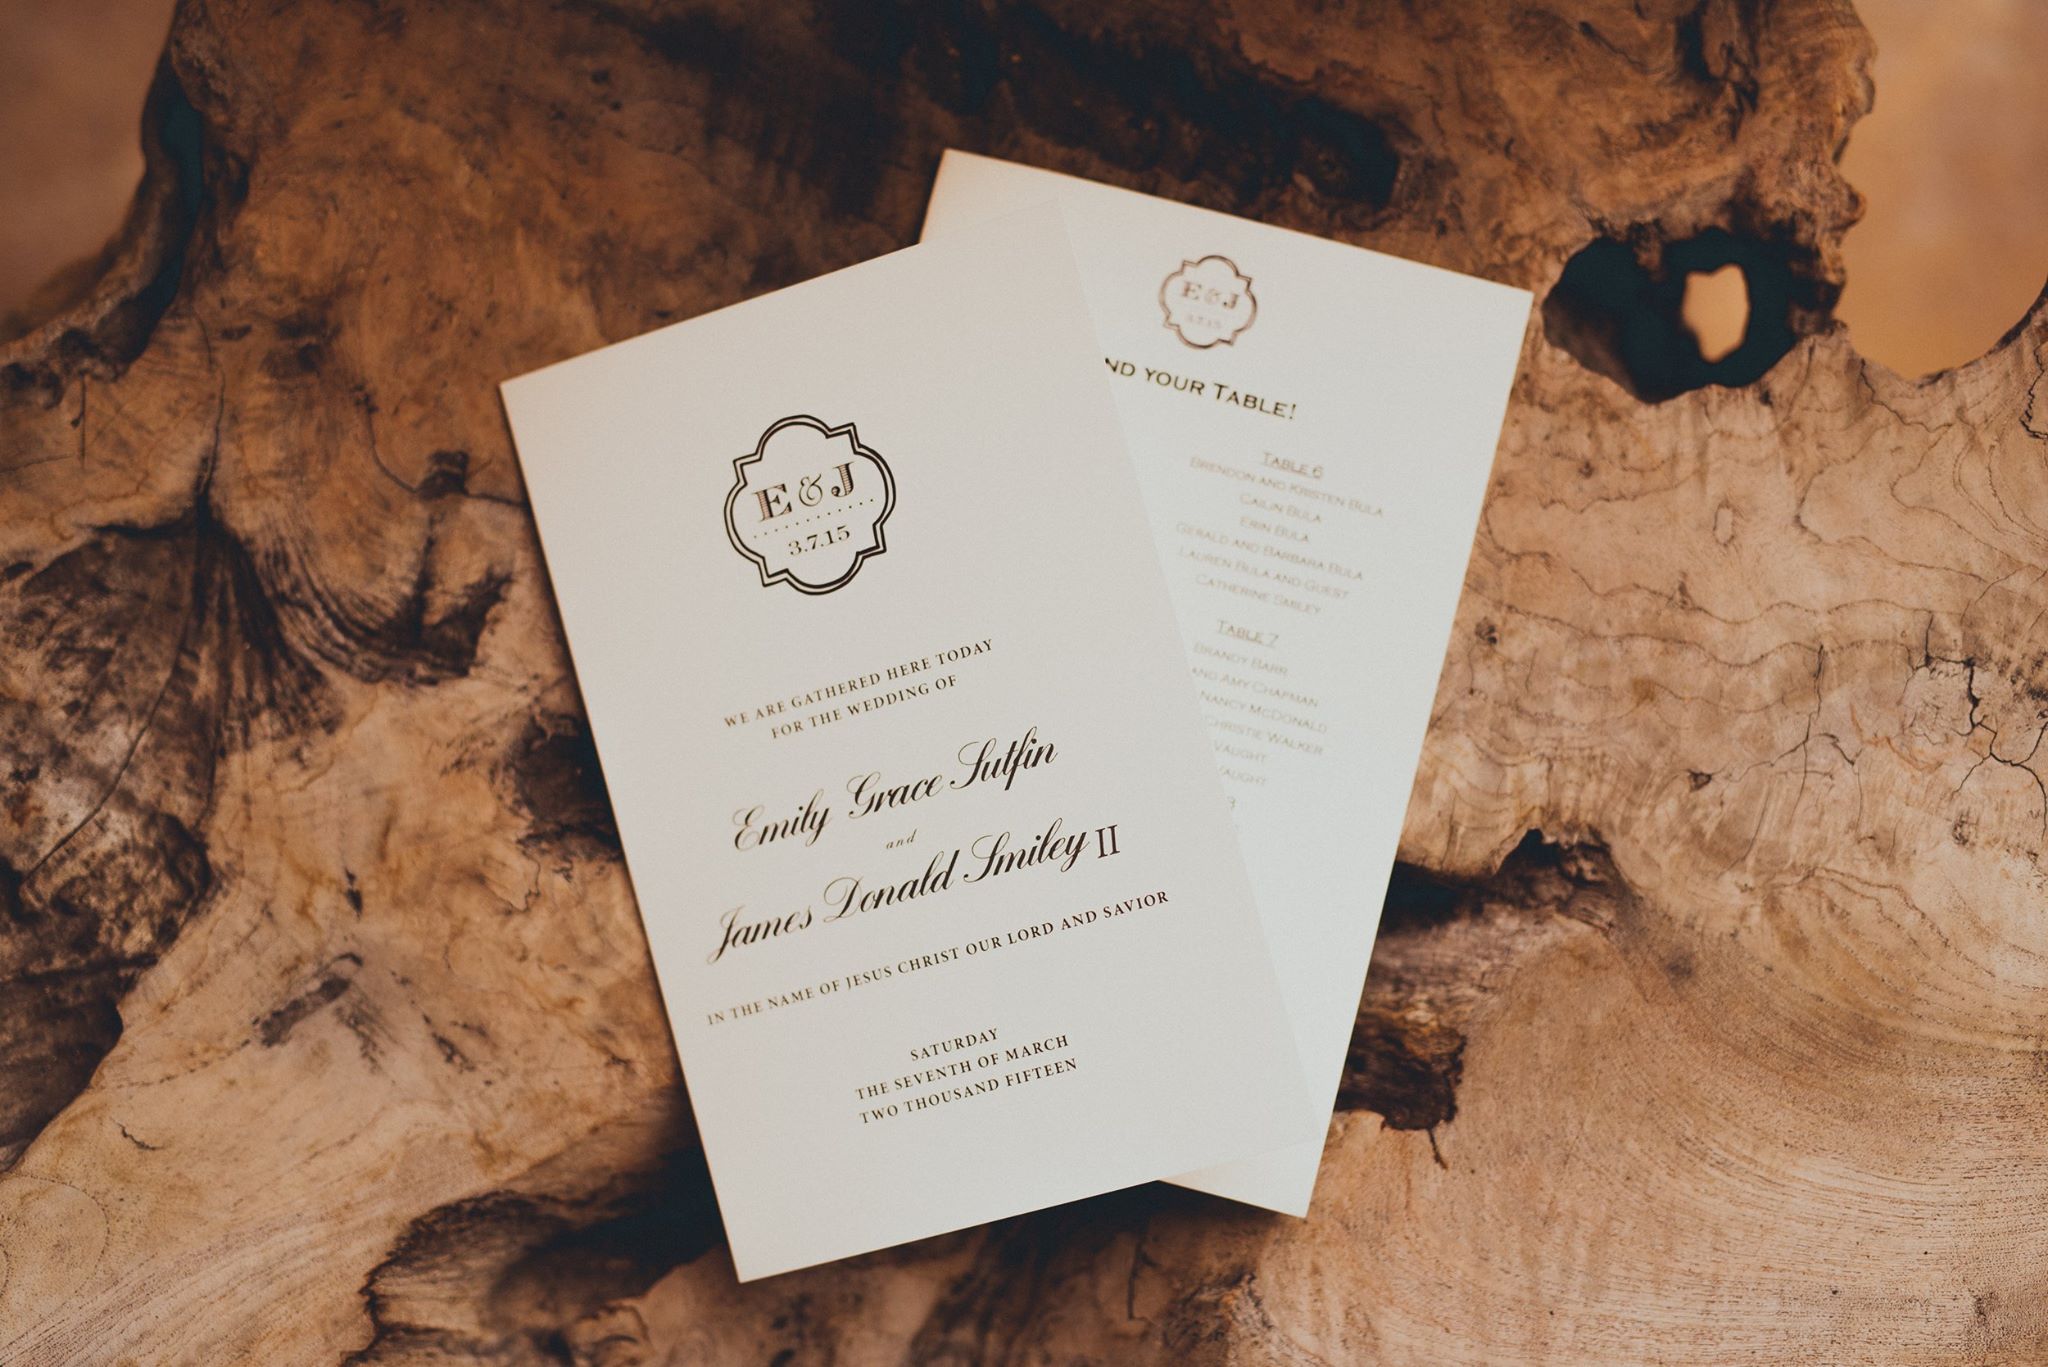  Wedding Programs  Photo by  Grant Daniels Photography  